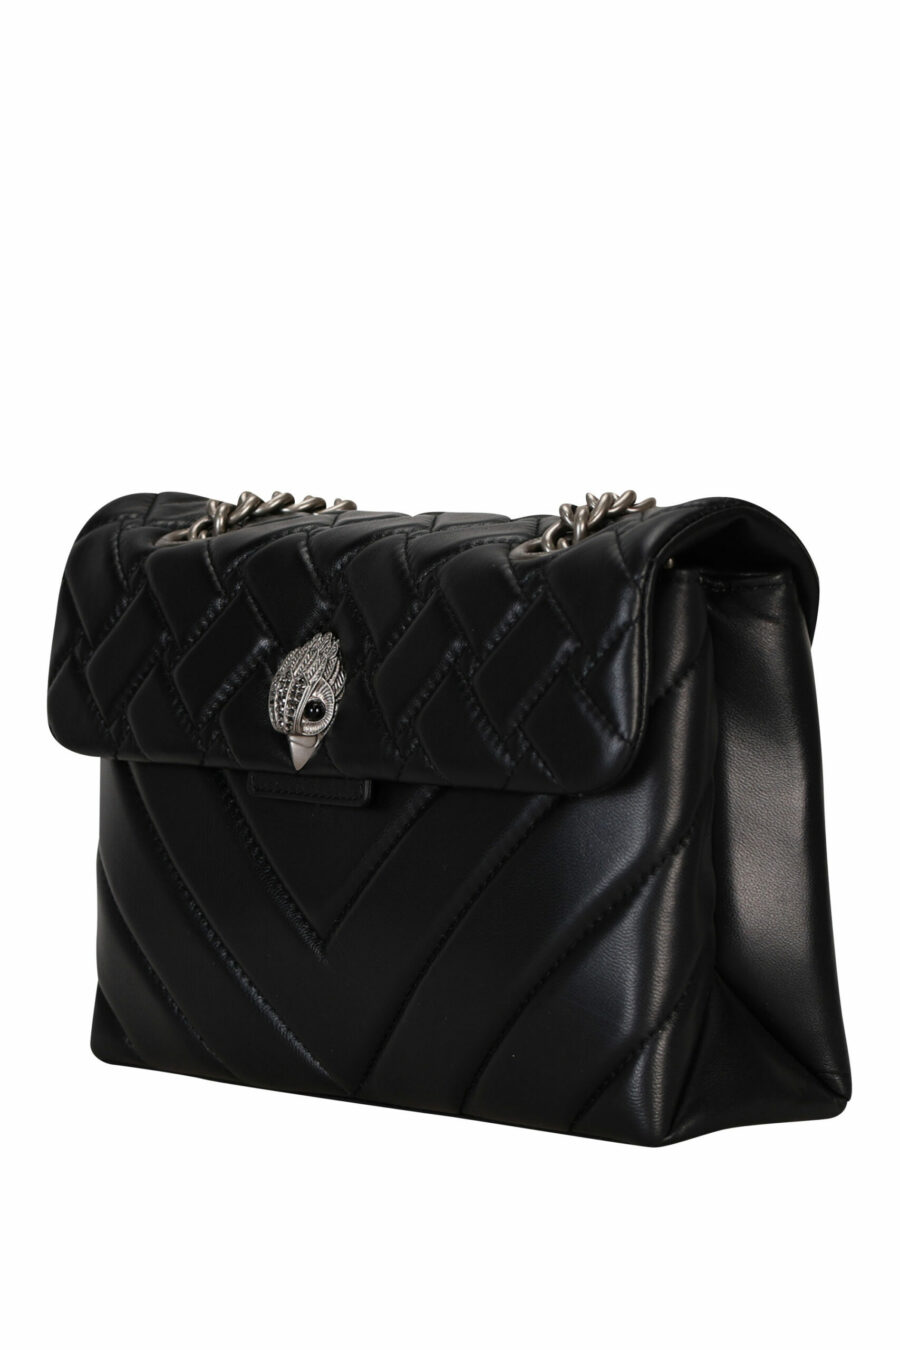 Black quilted shoulder bag with silver chain and silver eagle logo with black crystals - 5057720813514 1 scaled